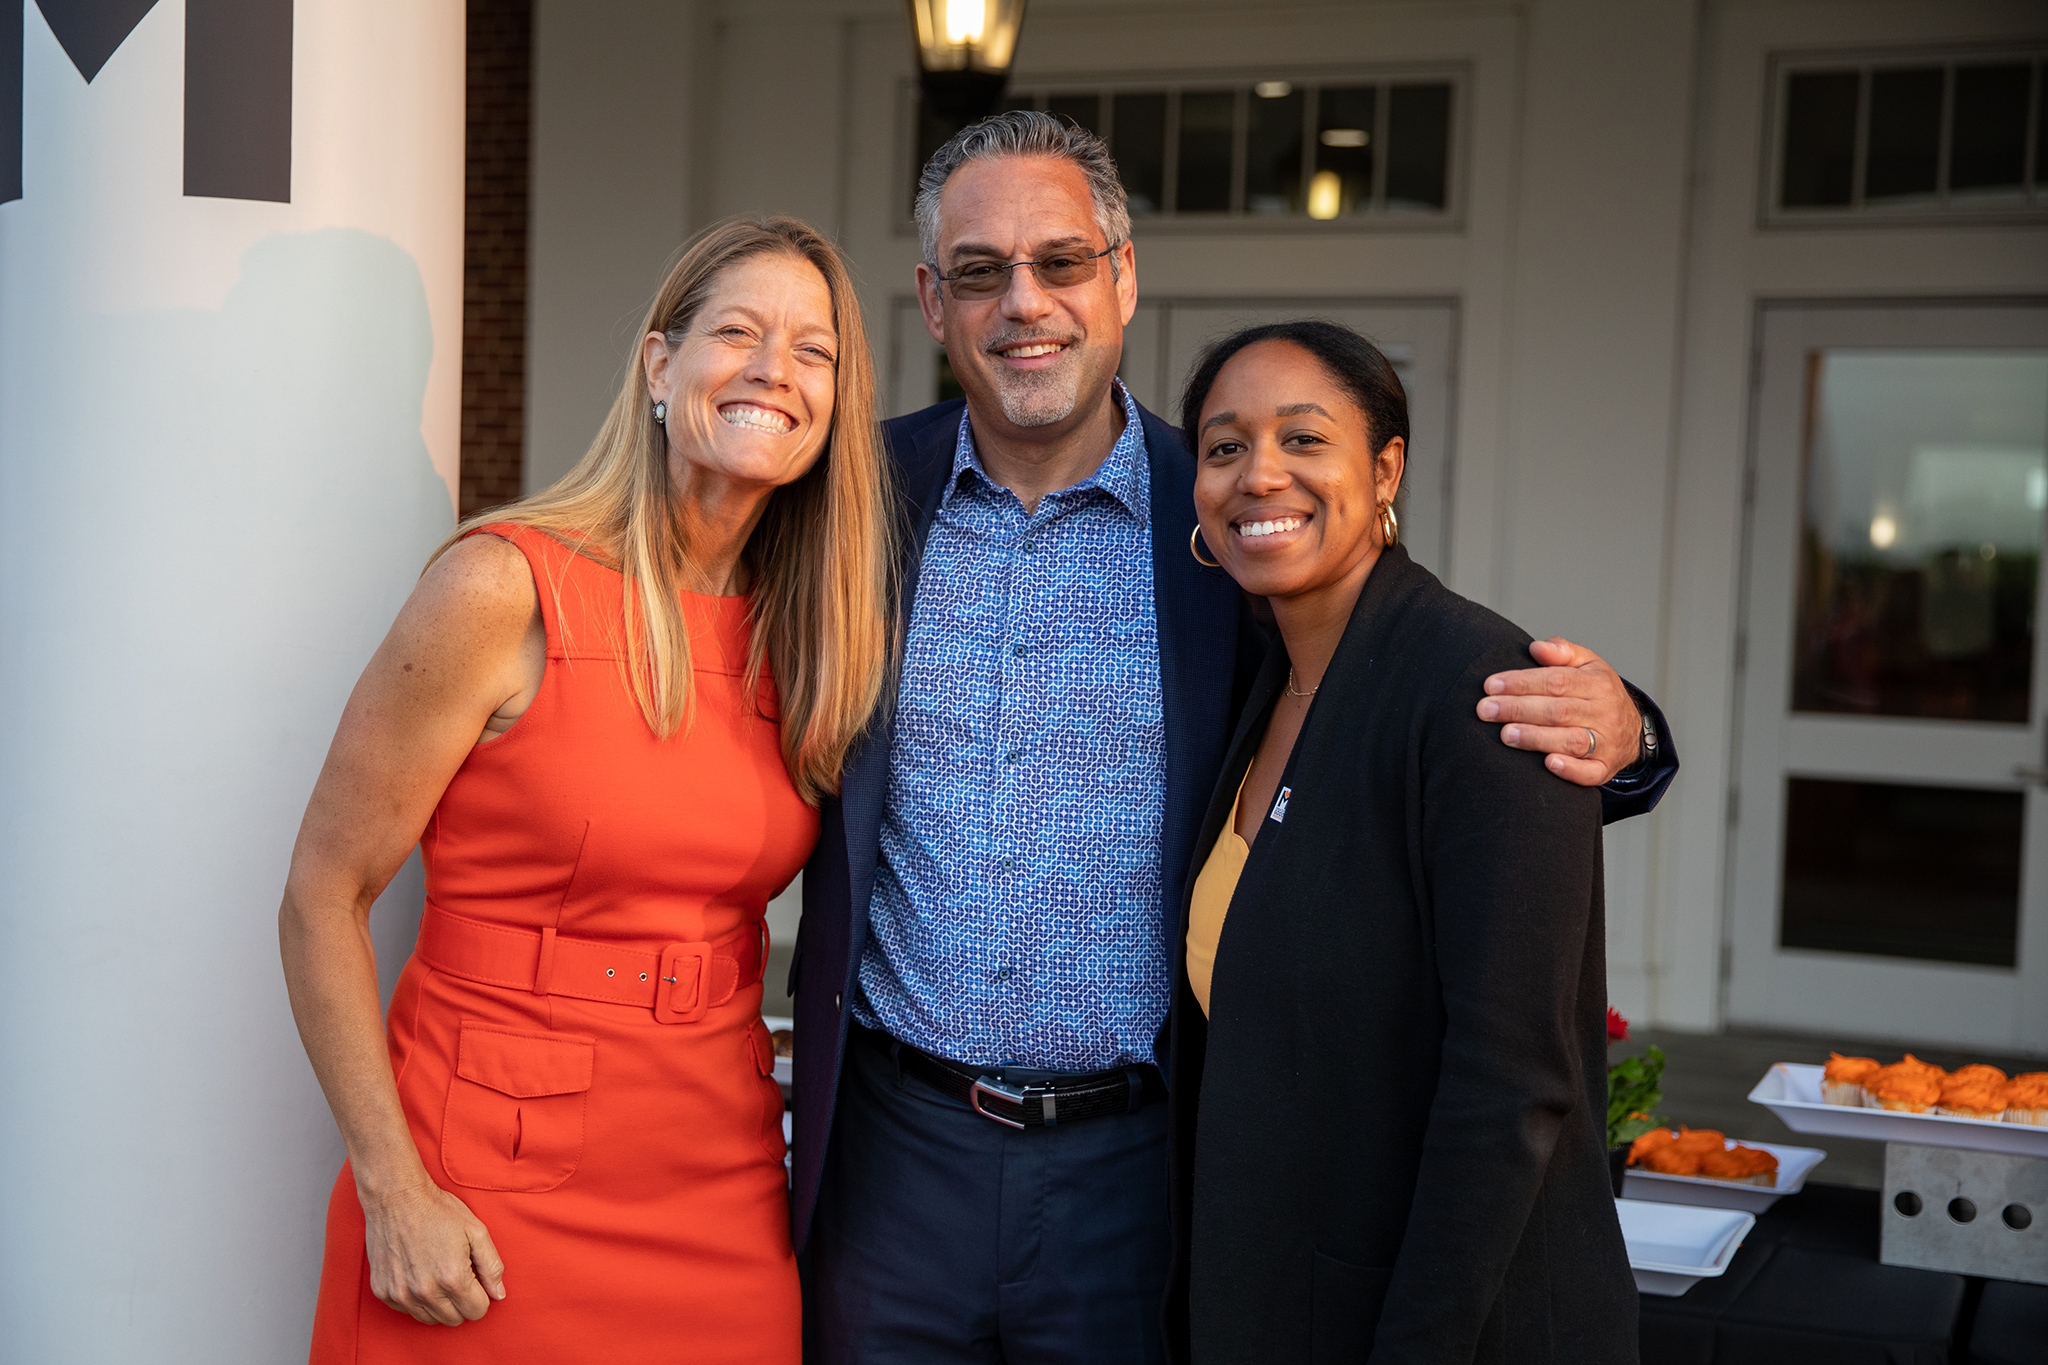 <b>FROM LEFT TO RIGHT: 1.</b> New Civic CEO, David Rothschild (center), with Artie Spruill, Greatest Good McDonogh Program Manager (right), and Bridget Collins, former Charles W. Britton Director of Character + Service and Director of Greatest Good McDonogh (left).